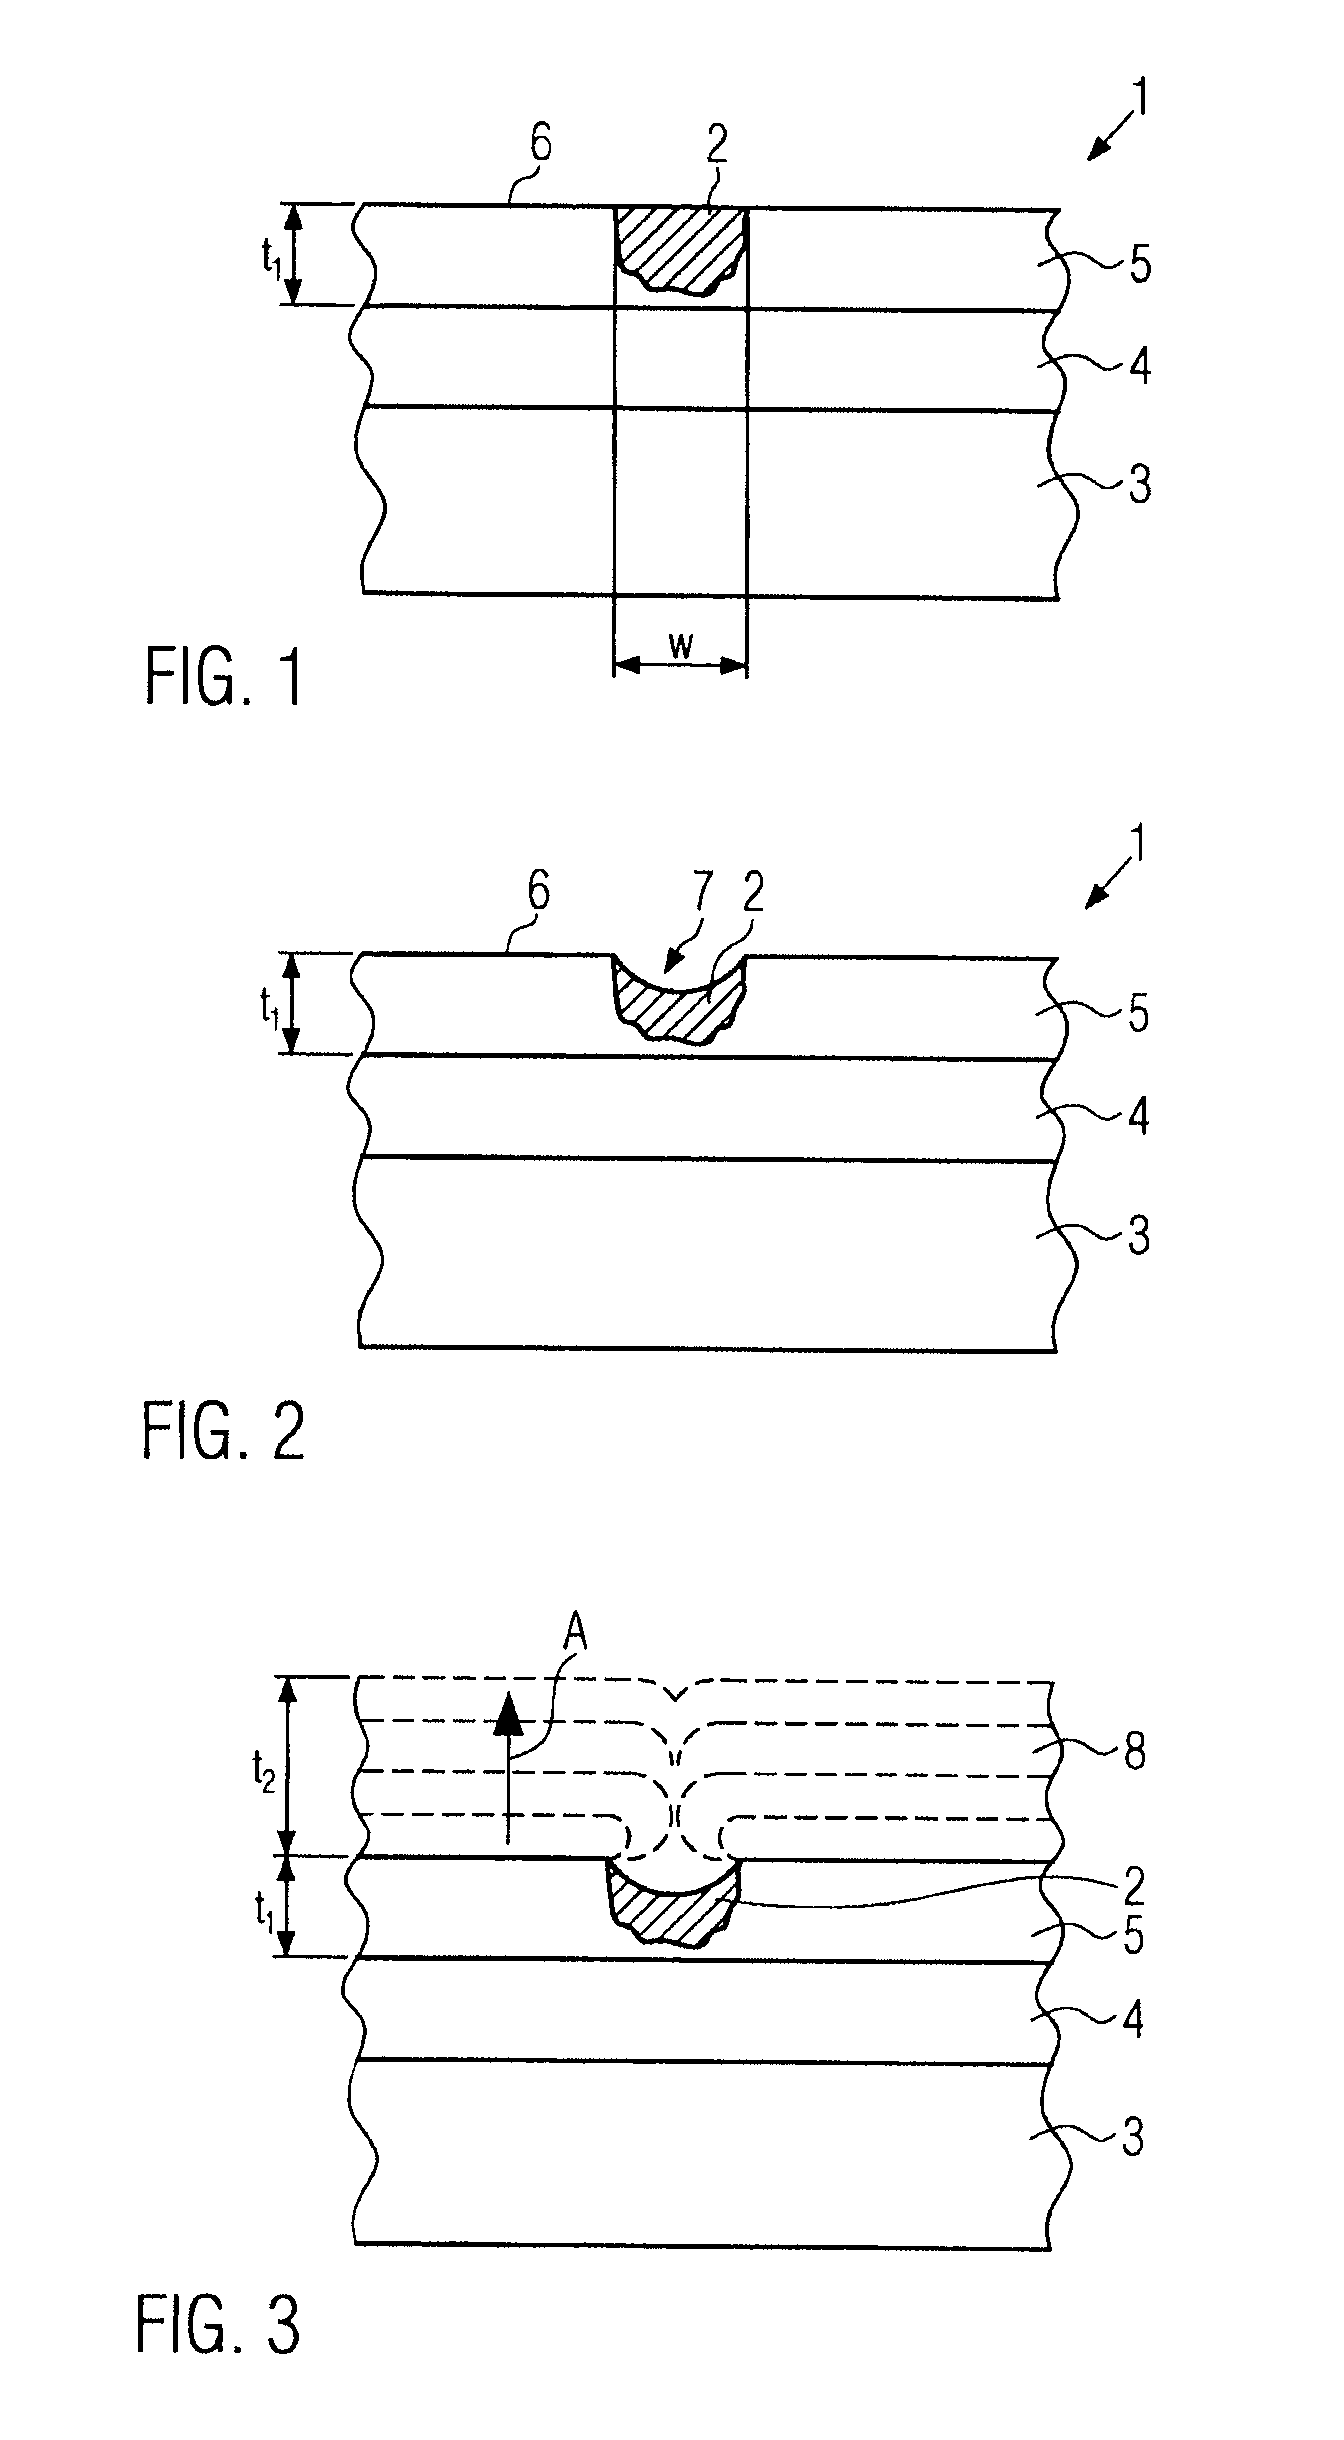 Method of improving a surface of a semiconductor substrate